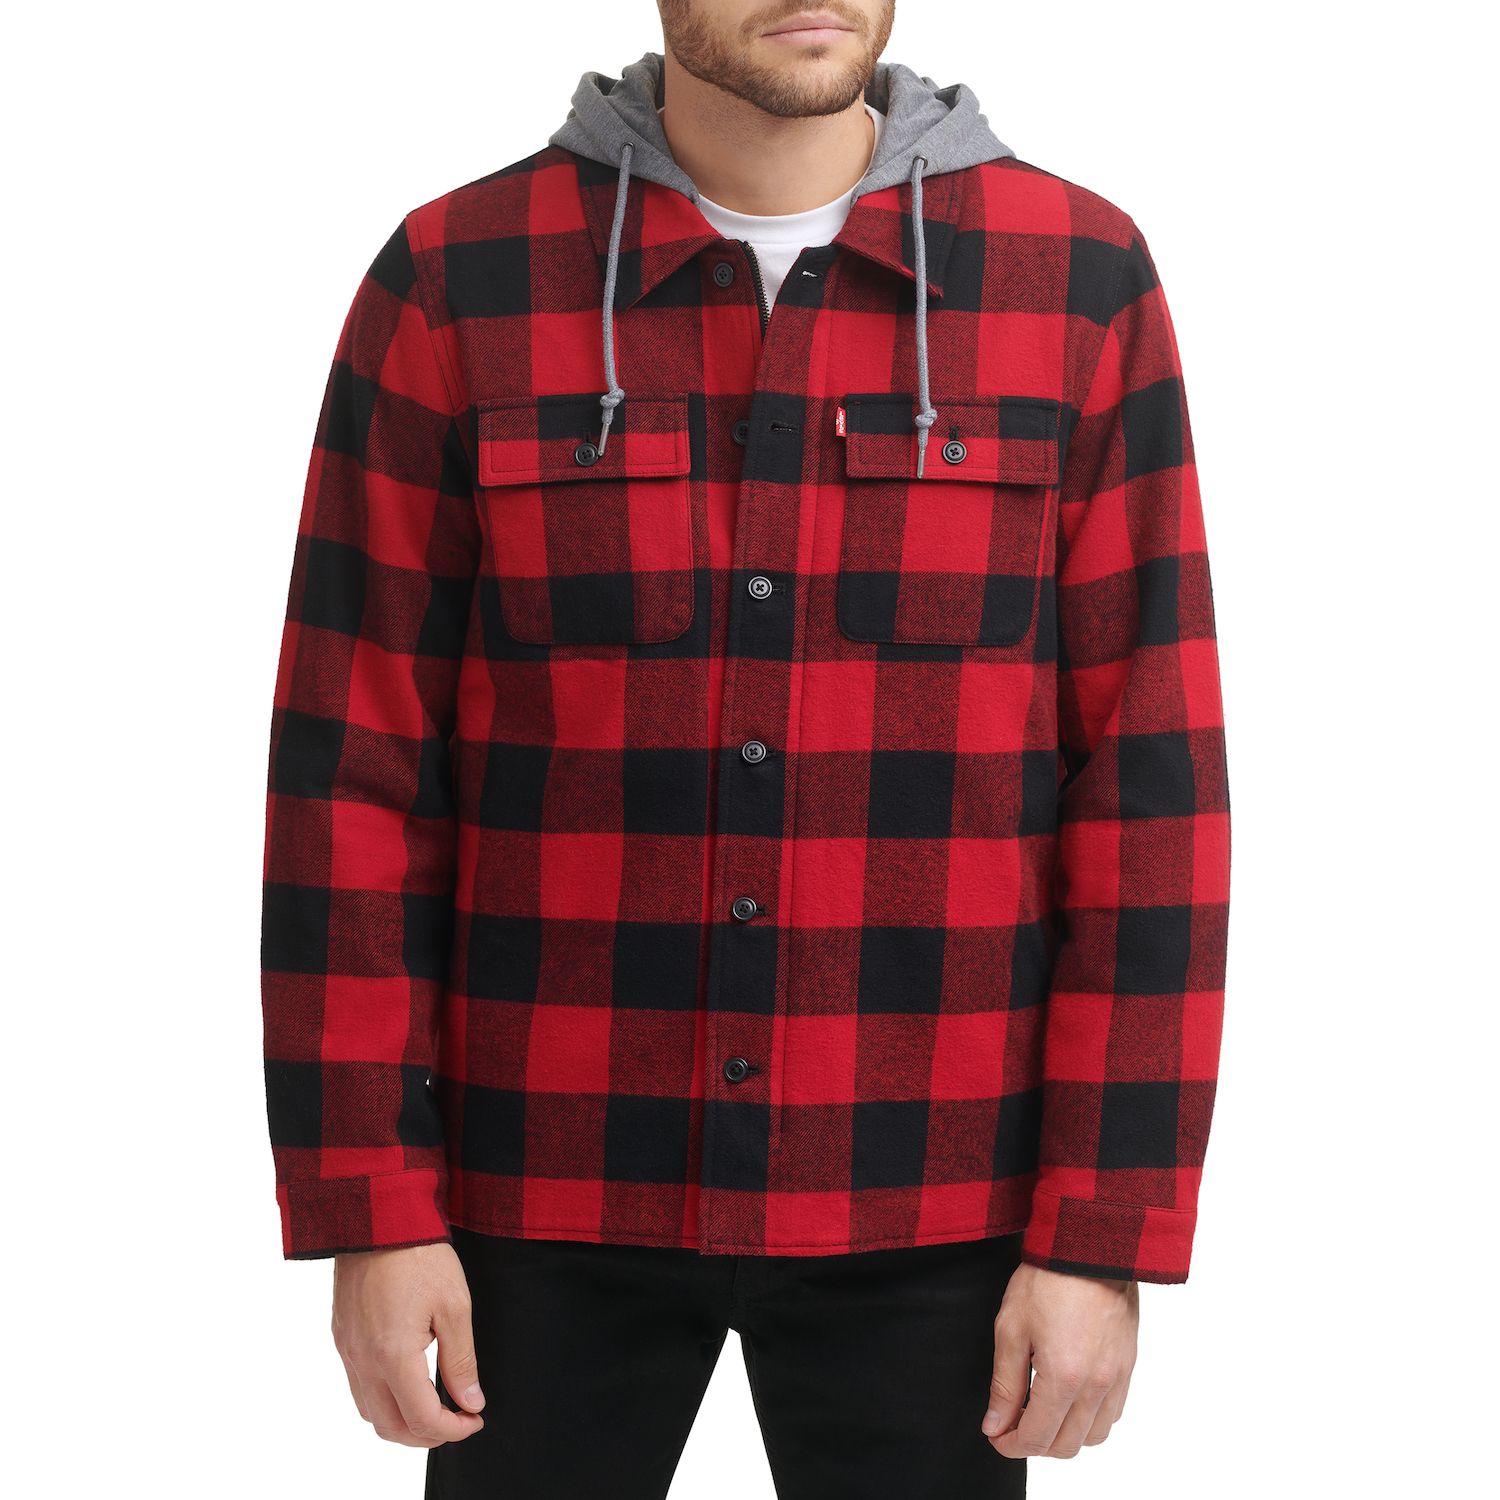 Levi's Flannel Hoodie Clearance, SAVE 57% 